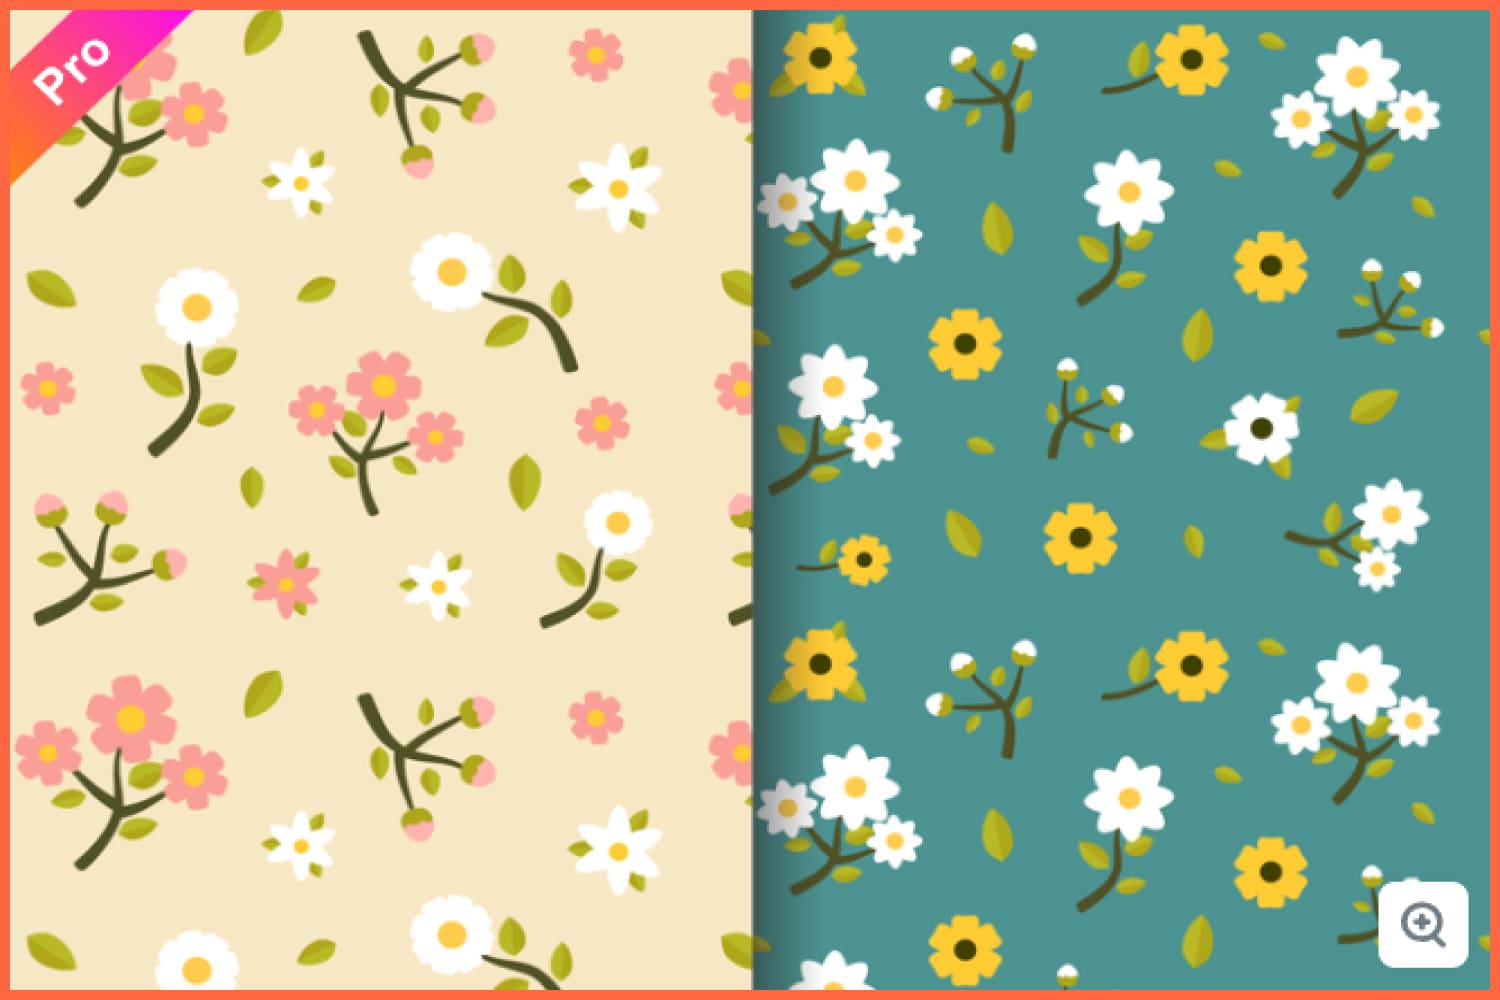 Painted white and yellow flowers on a beige and green background.